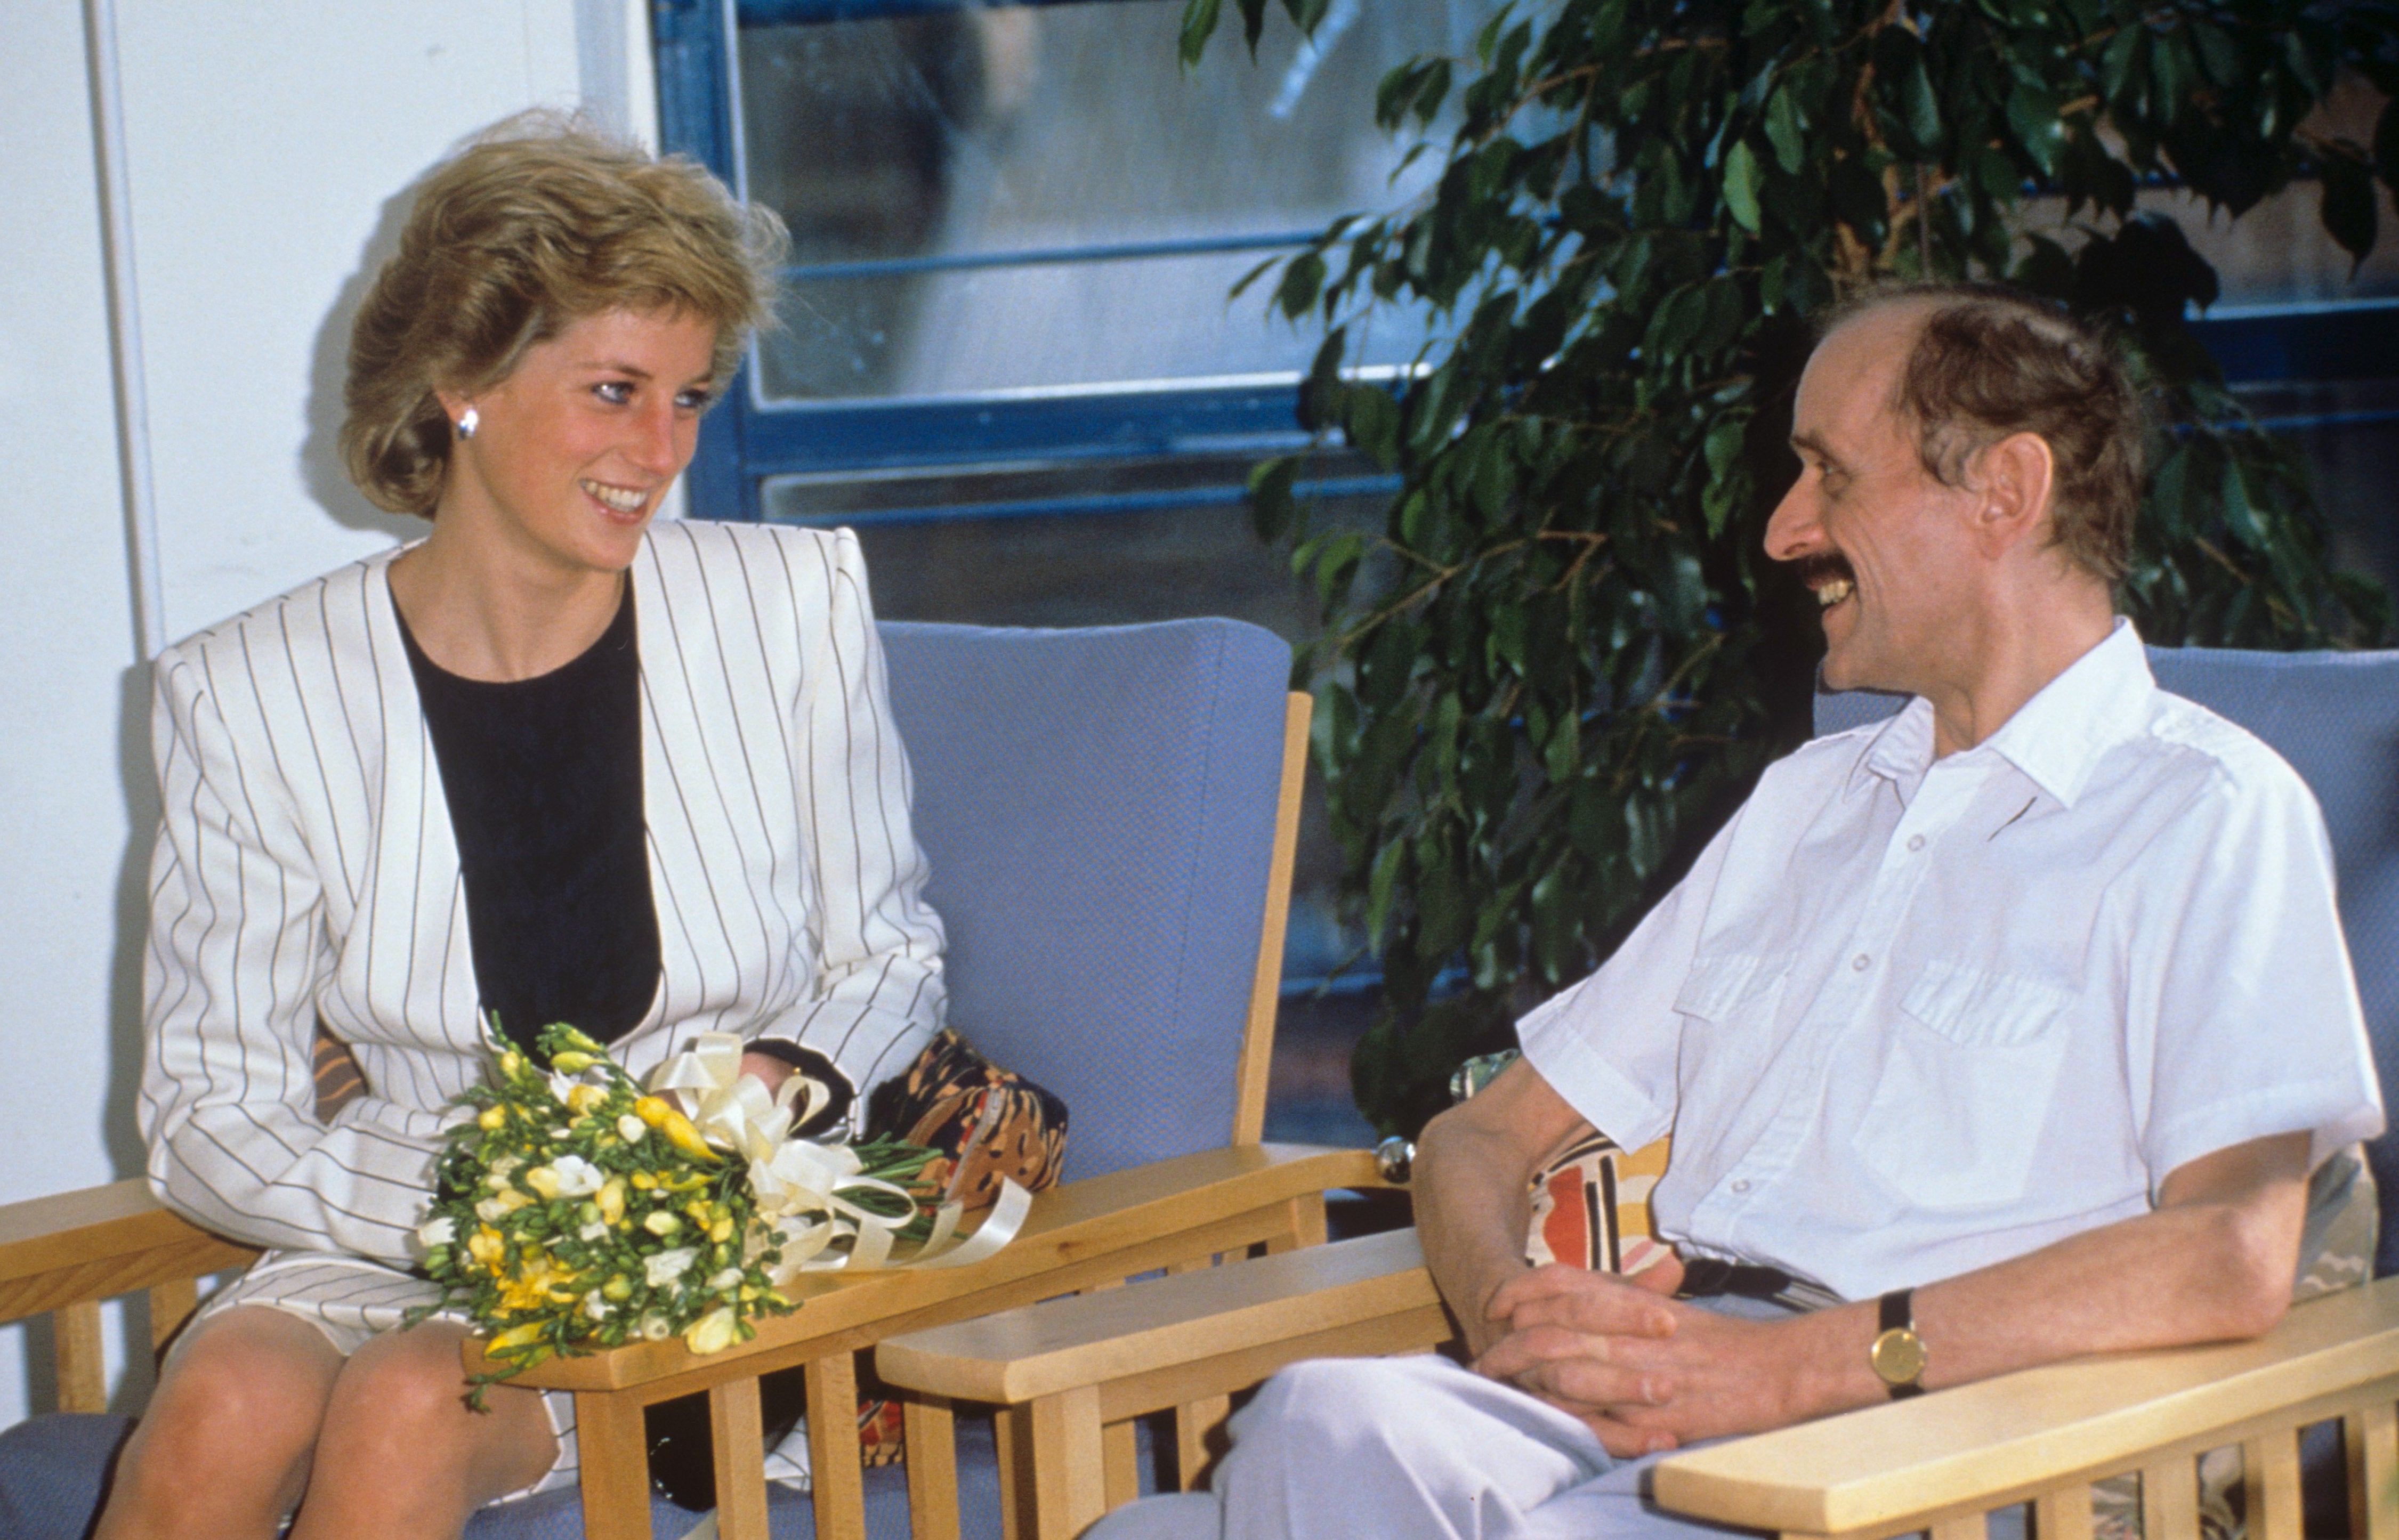 Princess Diana meeting patients with AIDS at the Lighthouse Centre in London in 1989.